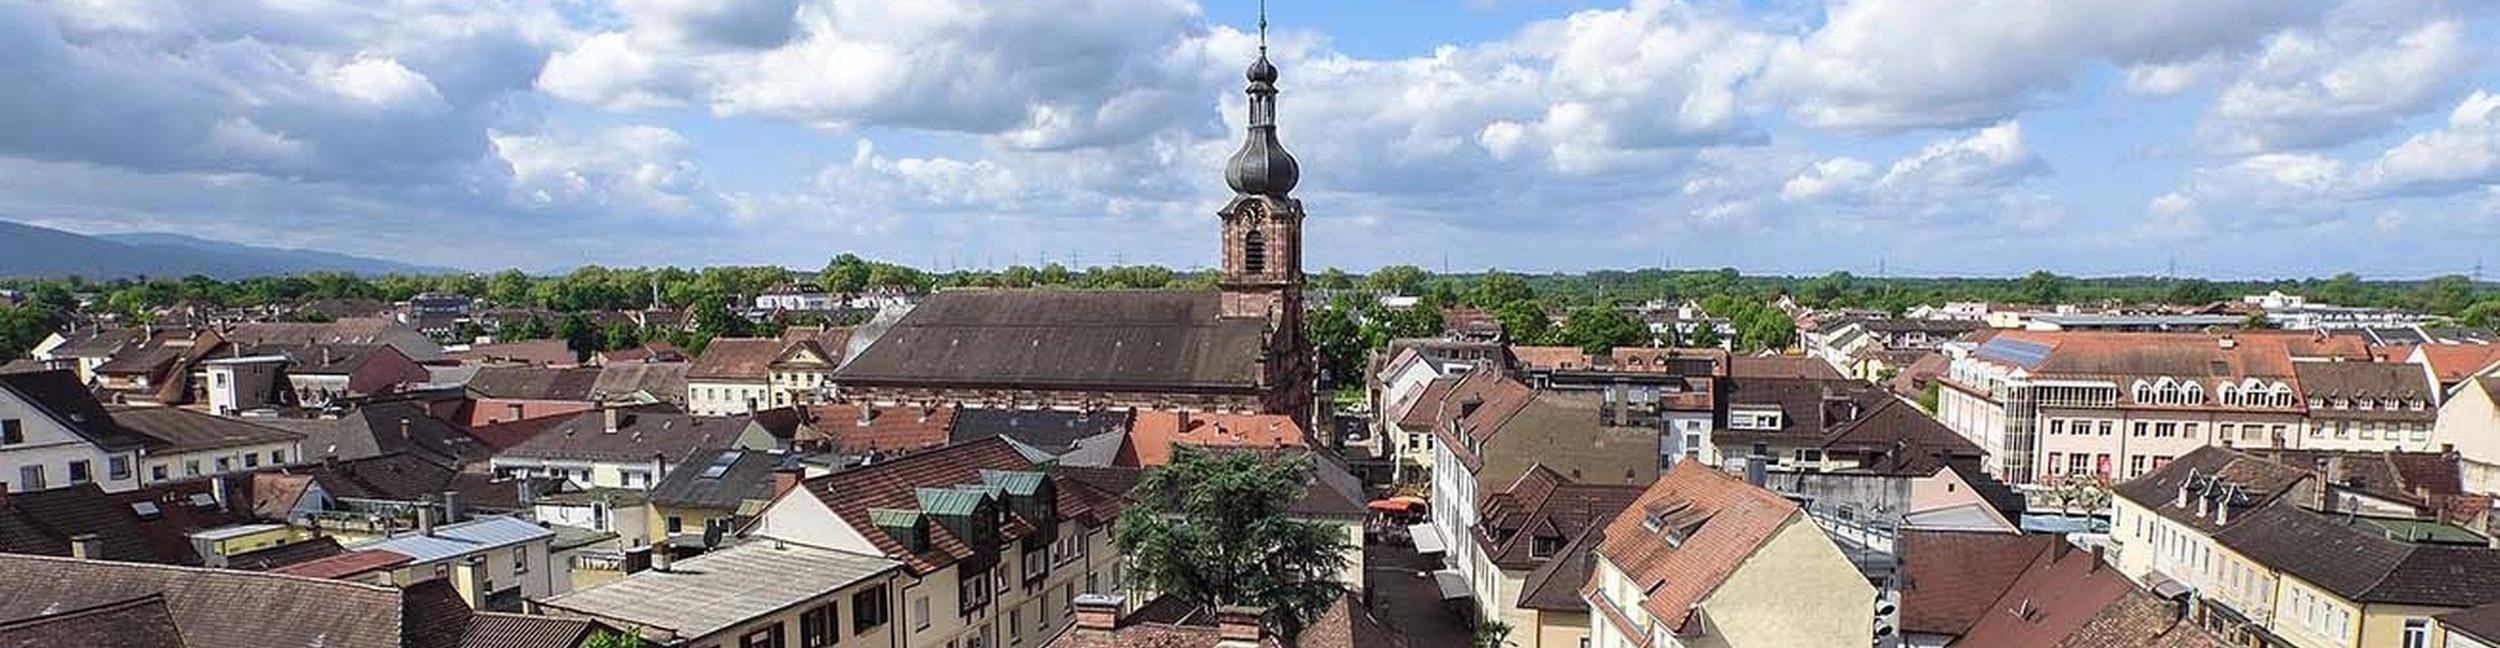 City center from above with the bell tower of the Saint Alexandre church